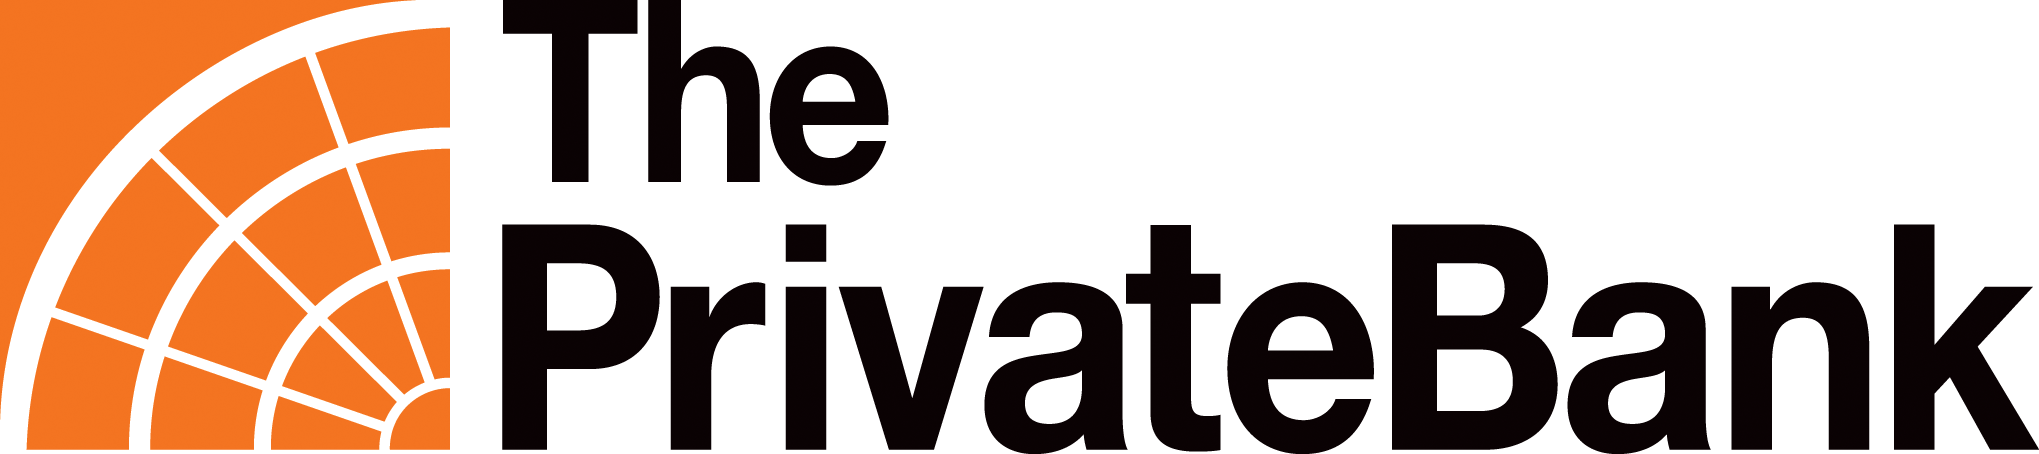 The Private Bank Brand Logo